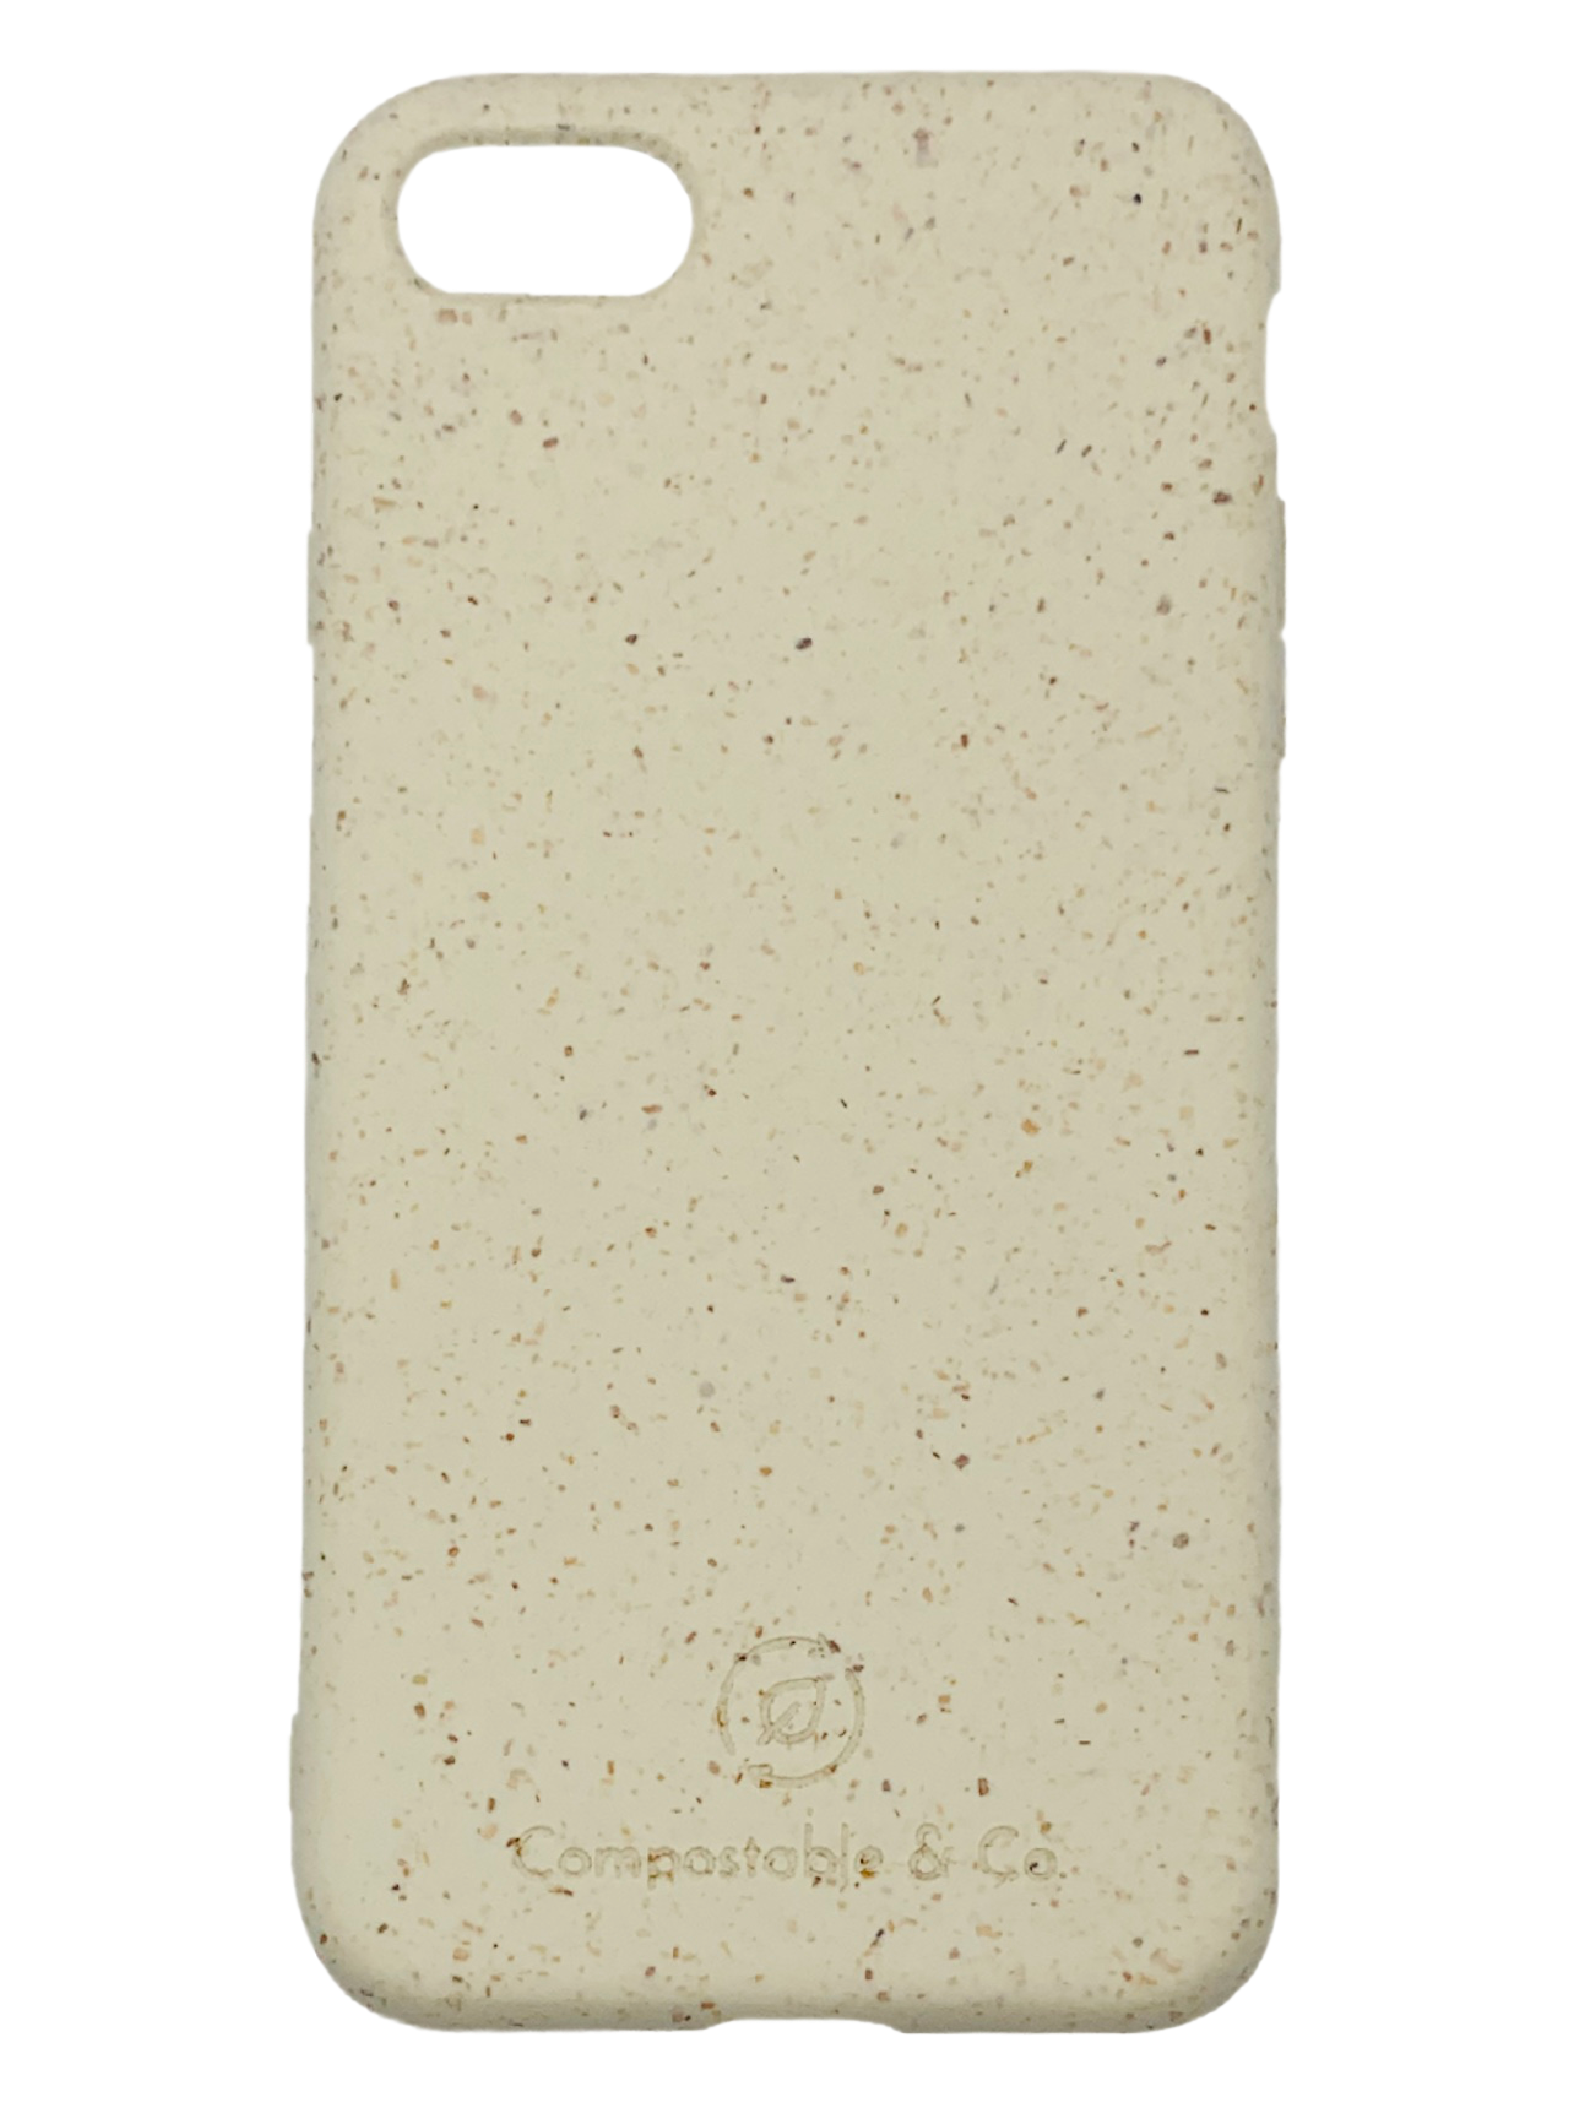 Compostable & Co. iPhone 7 / 8 / SE 2020 white biodegradable phone case